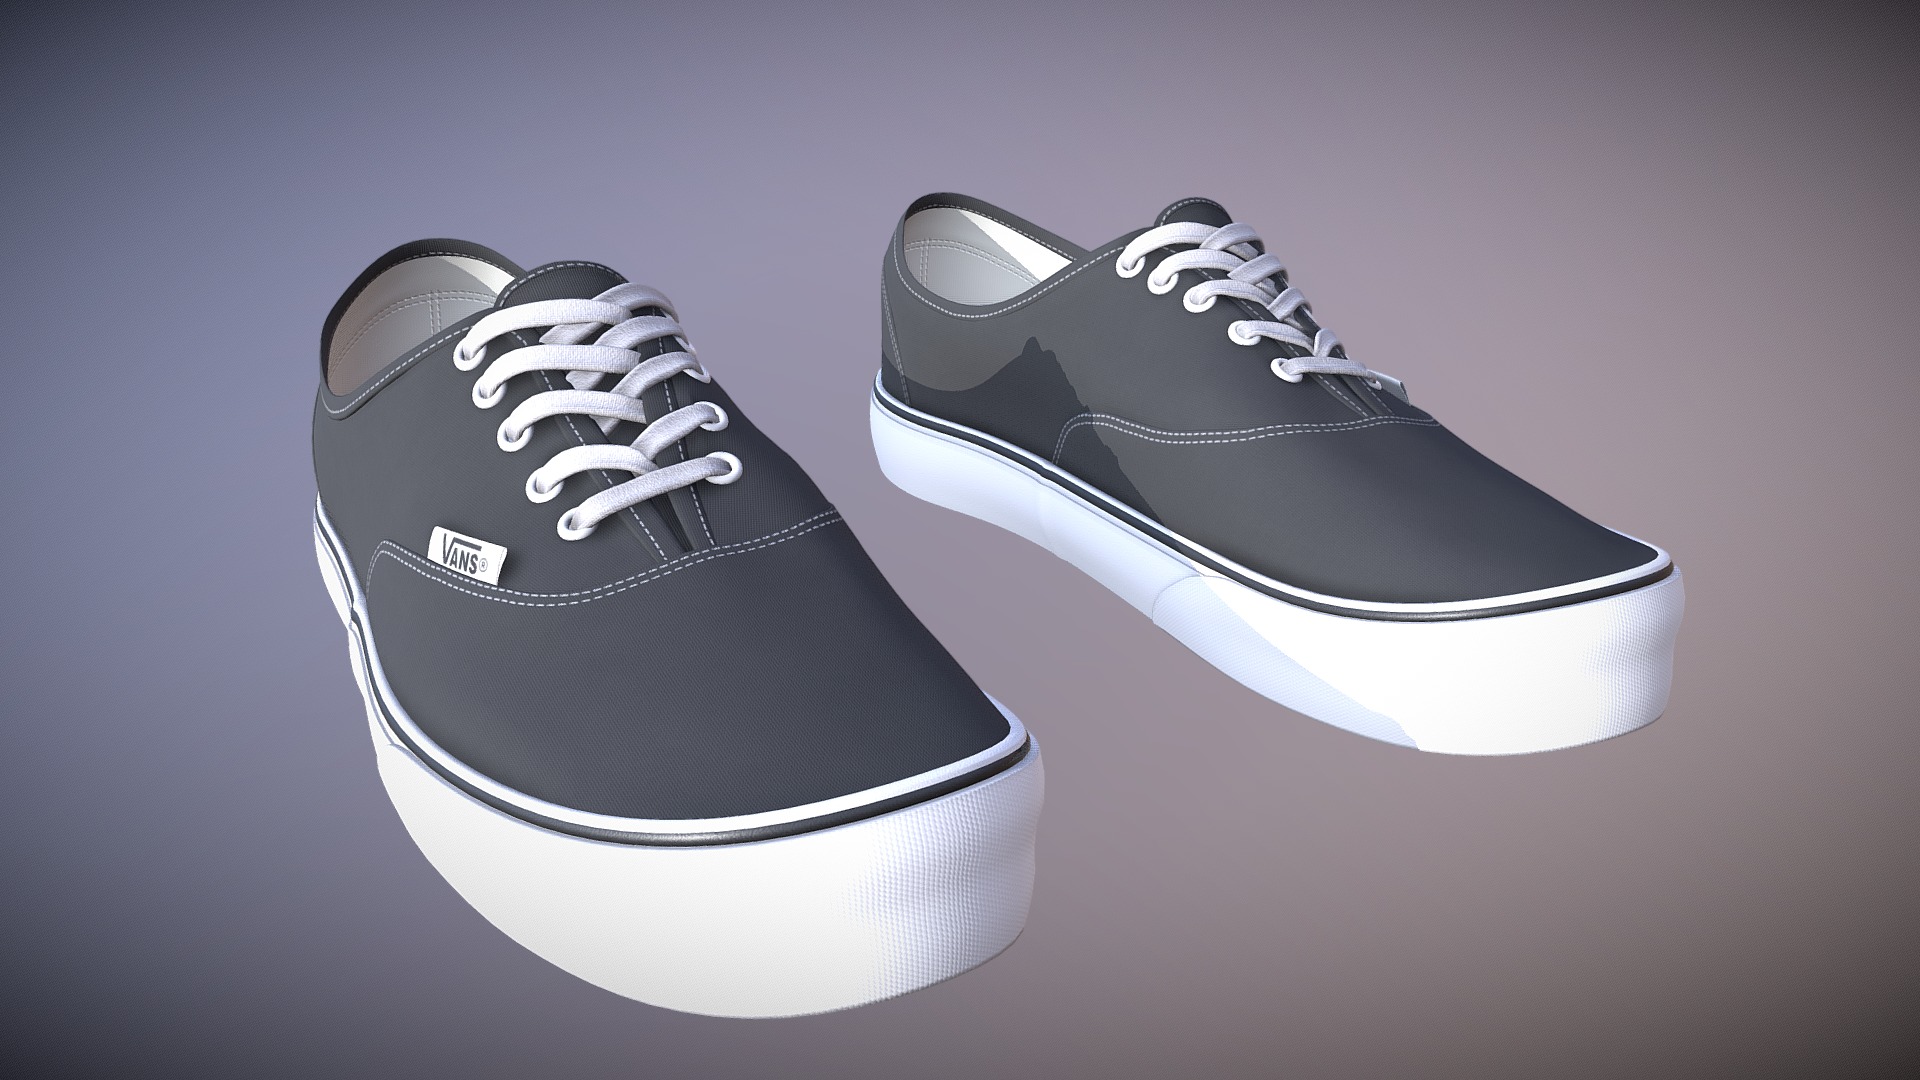 3D model Vans Black N White - This is a 3D model of the Vans Black N White. The 3D model is about a pair of black and white shoes.